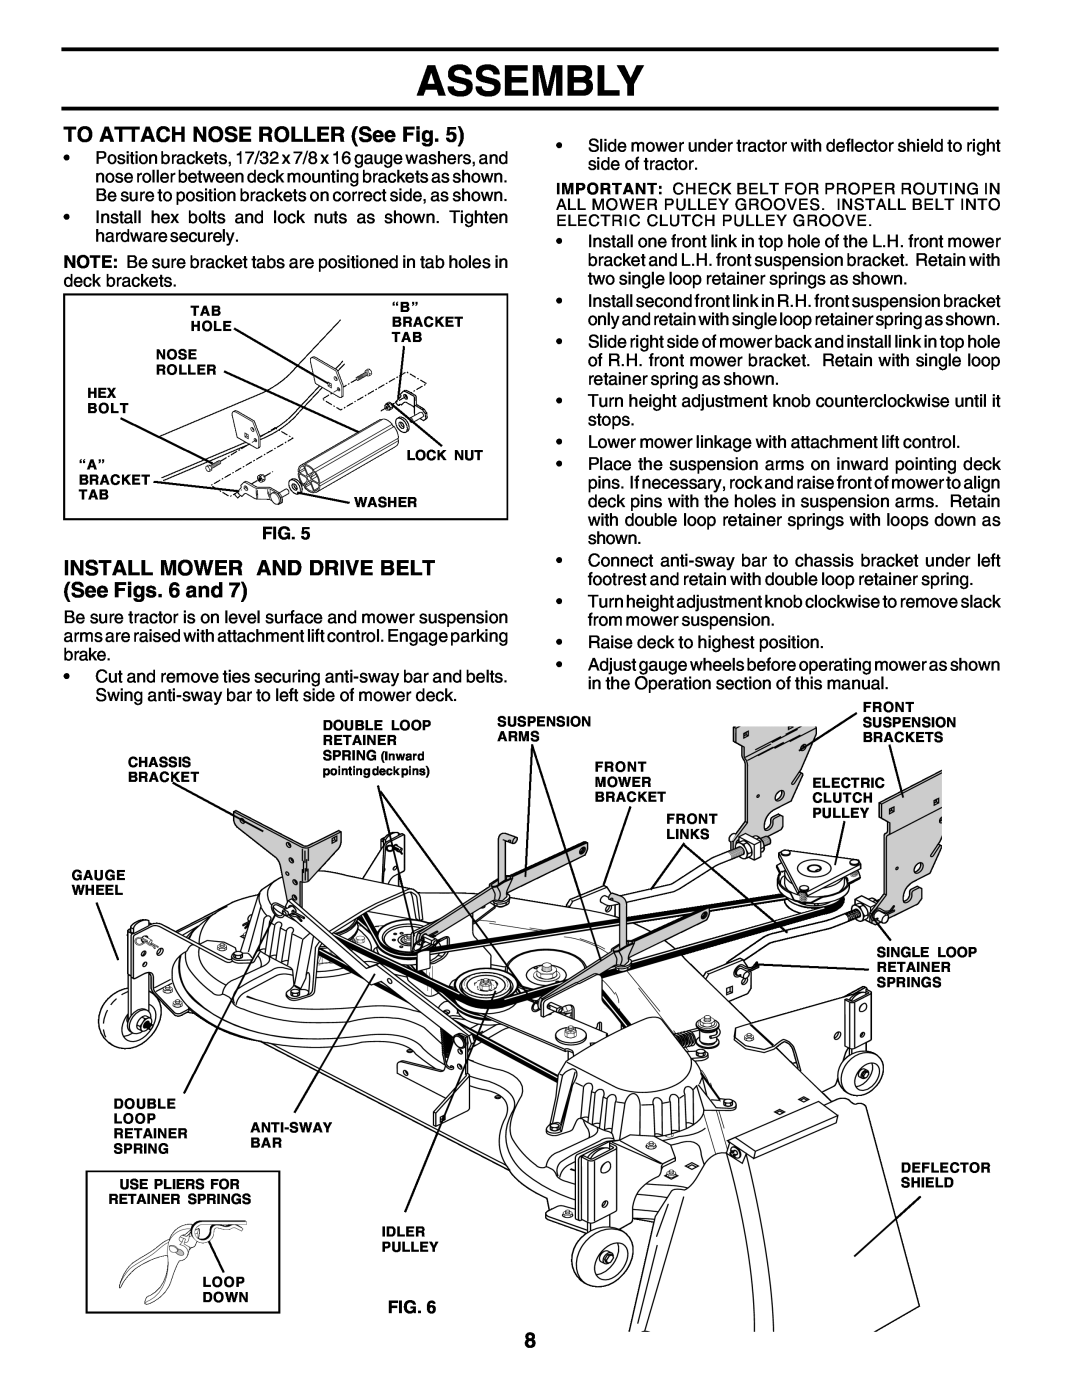 Poulan PRGT22H50B owner manual Assembly, TO ATTACH NOSE ROLLER See Fig, Install Mower And Drive Belt, See Figs. 6 and 